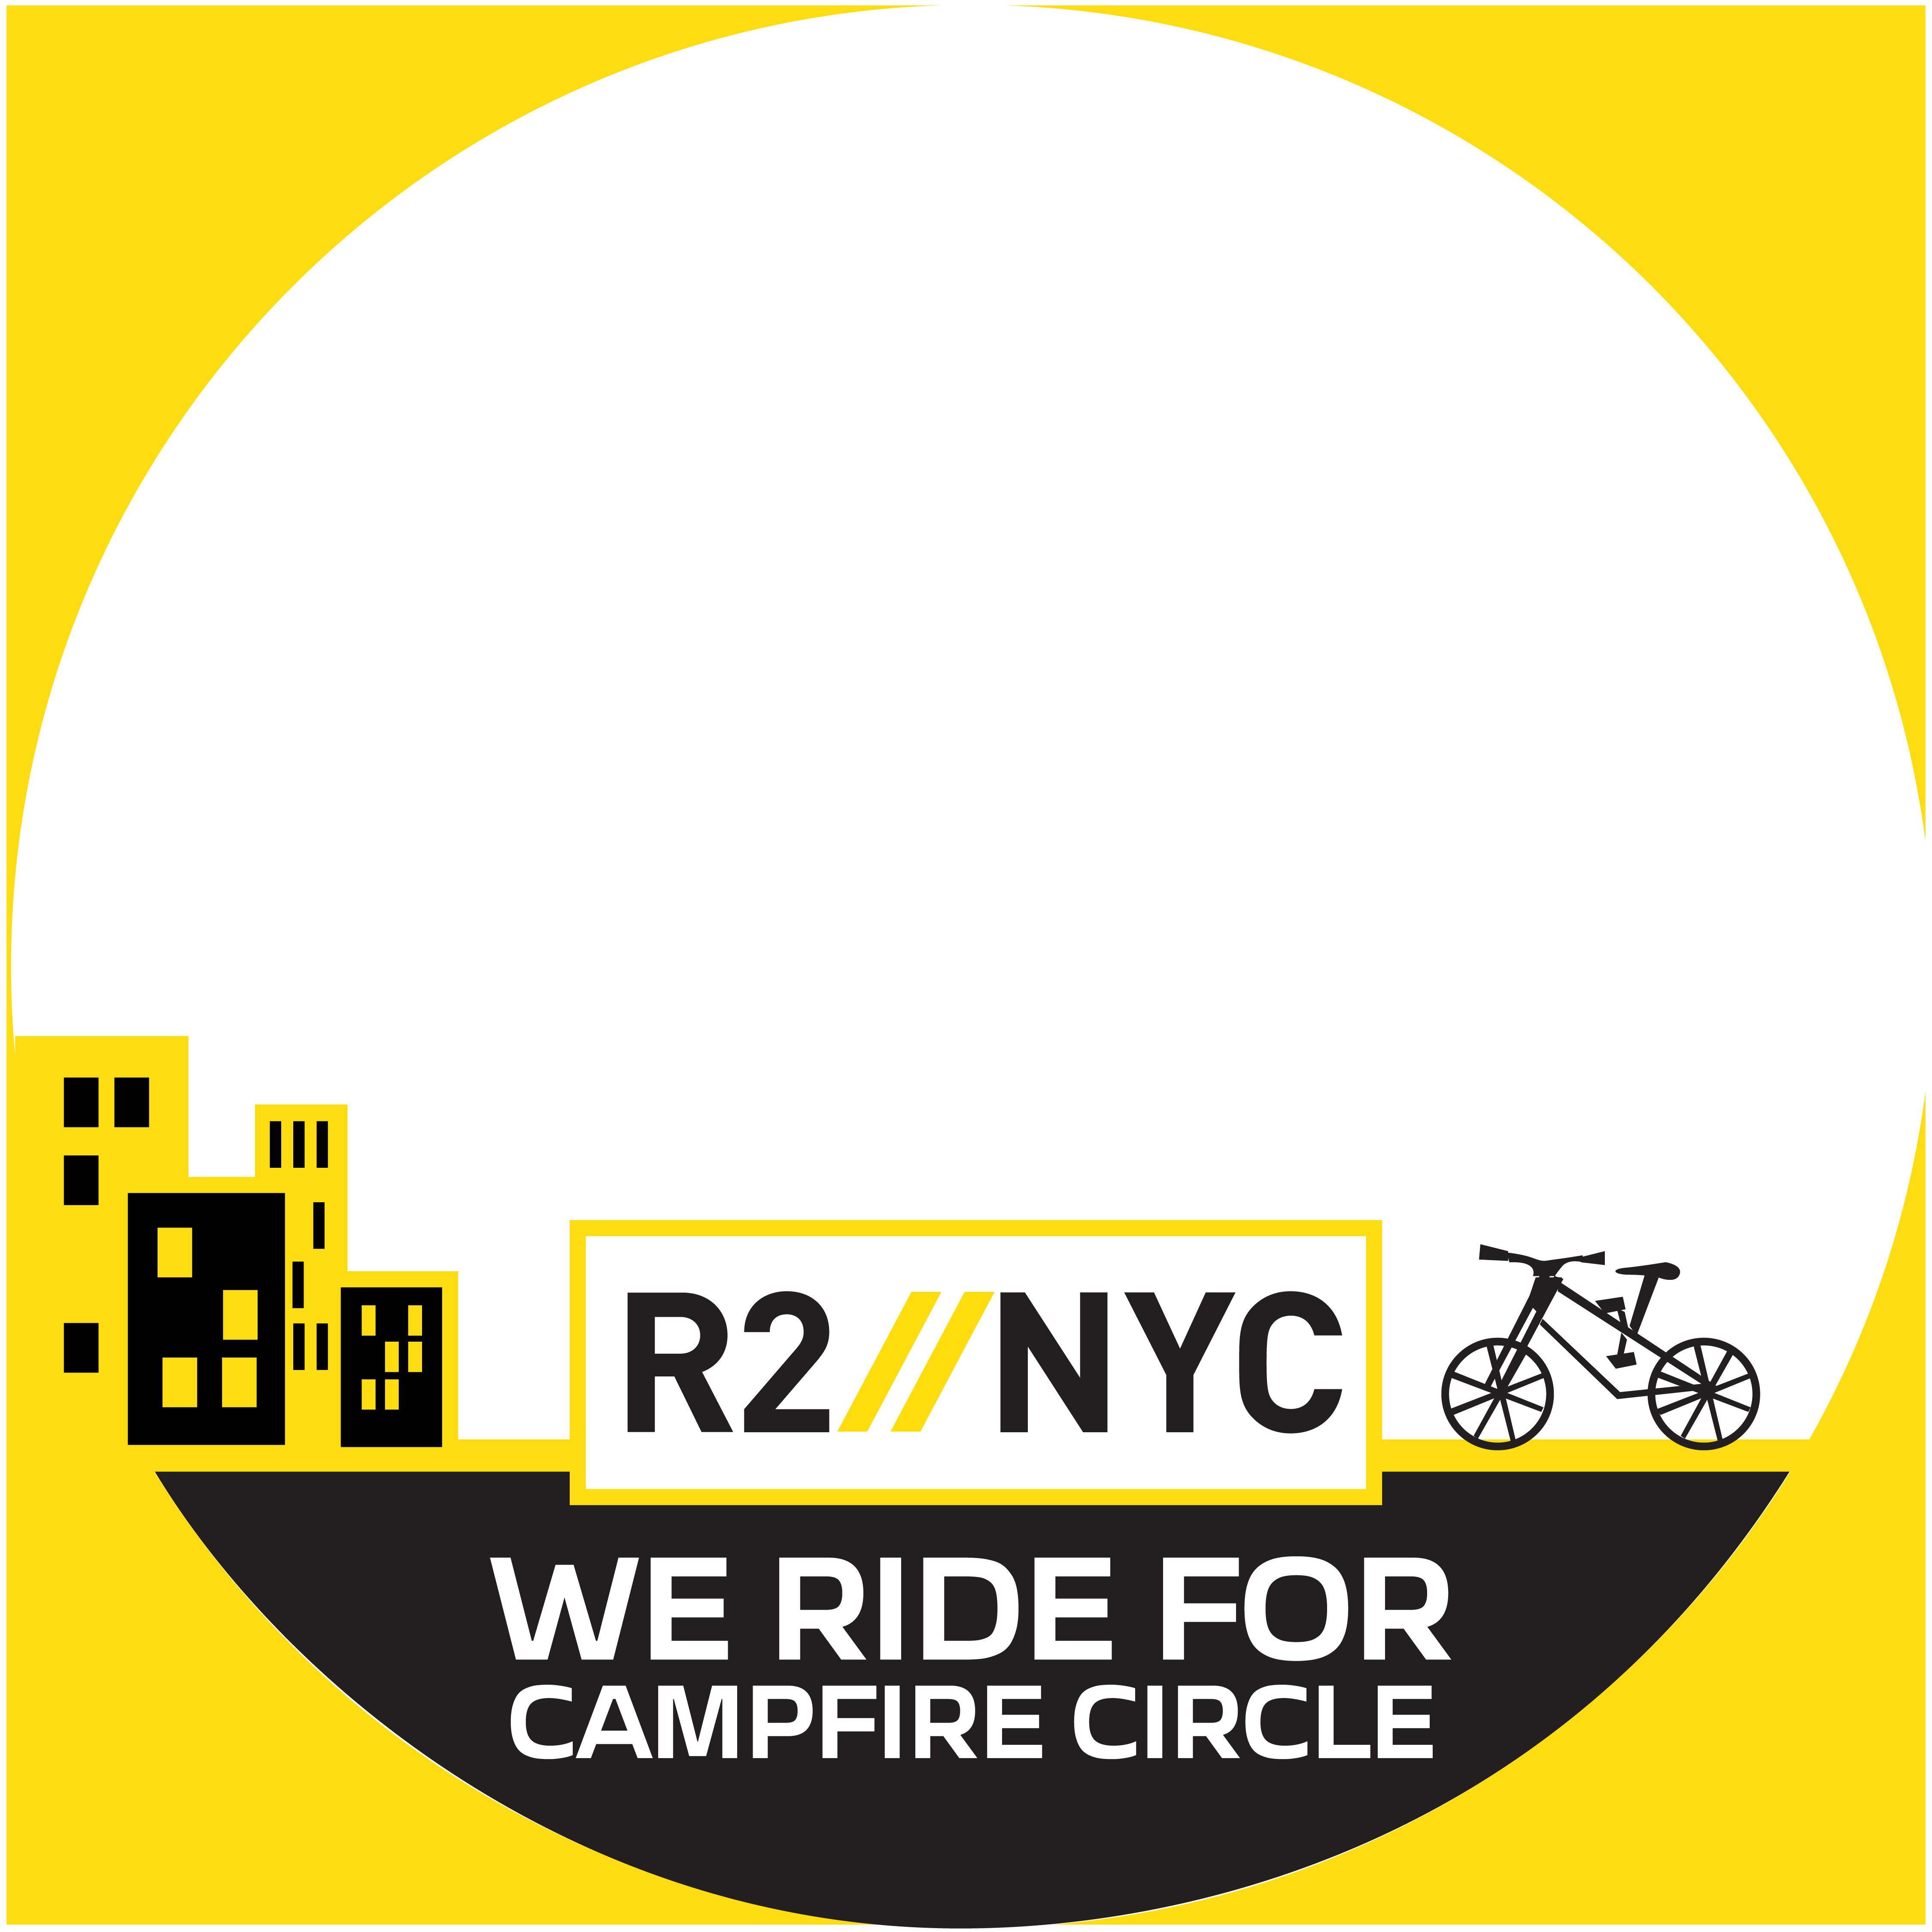 R2NYC Facebook Frame. We ride for Campfire Circle